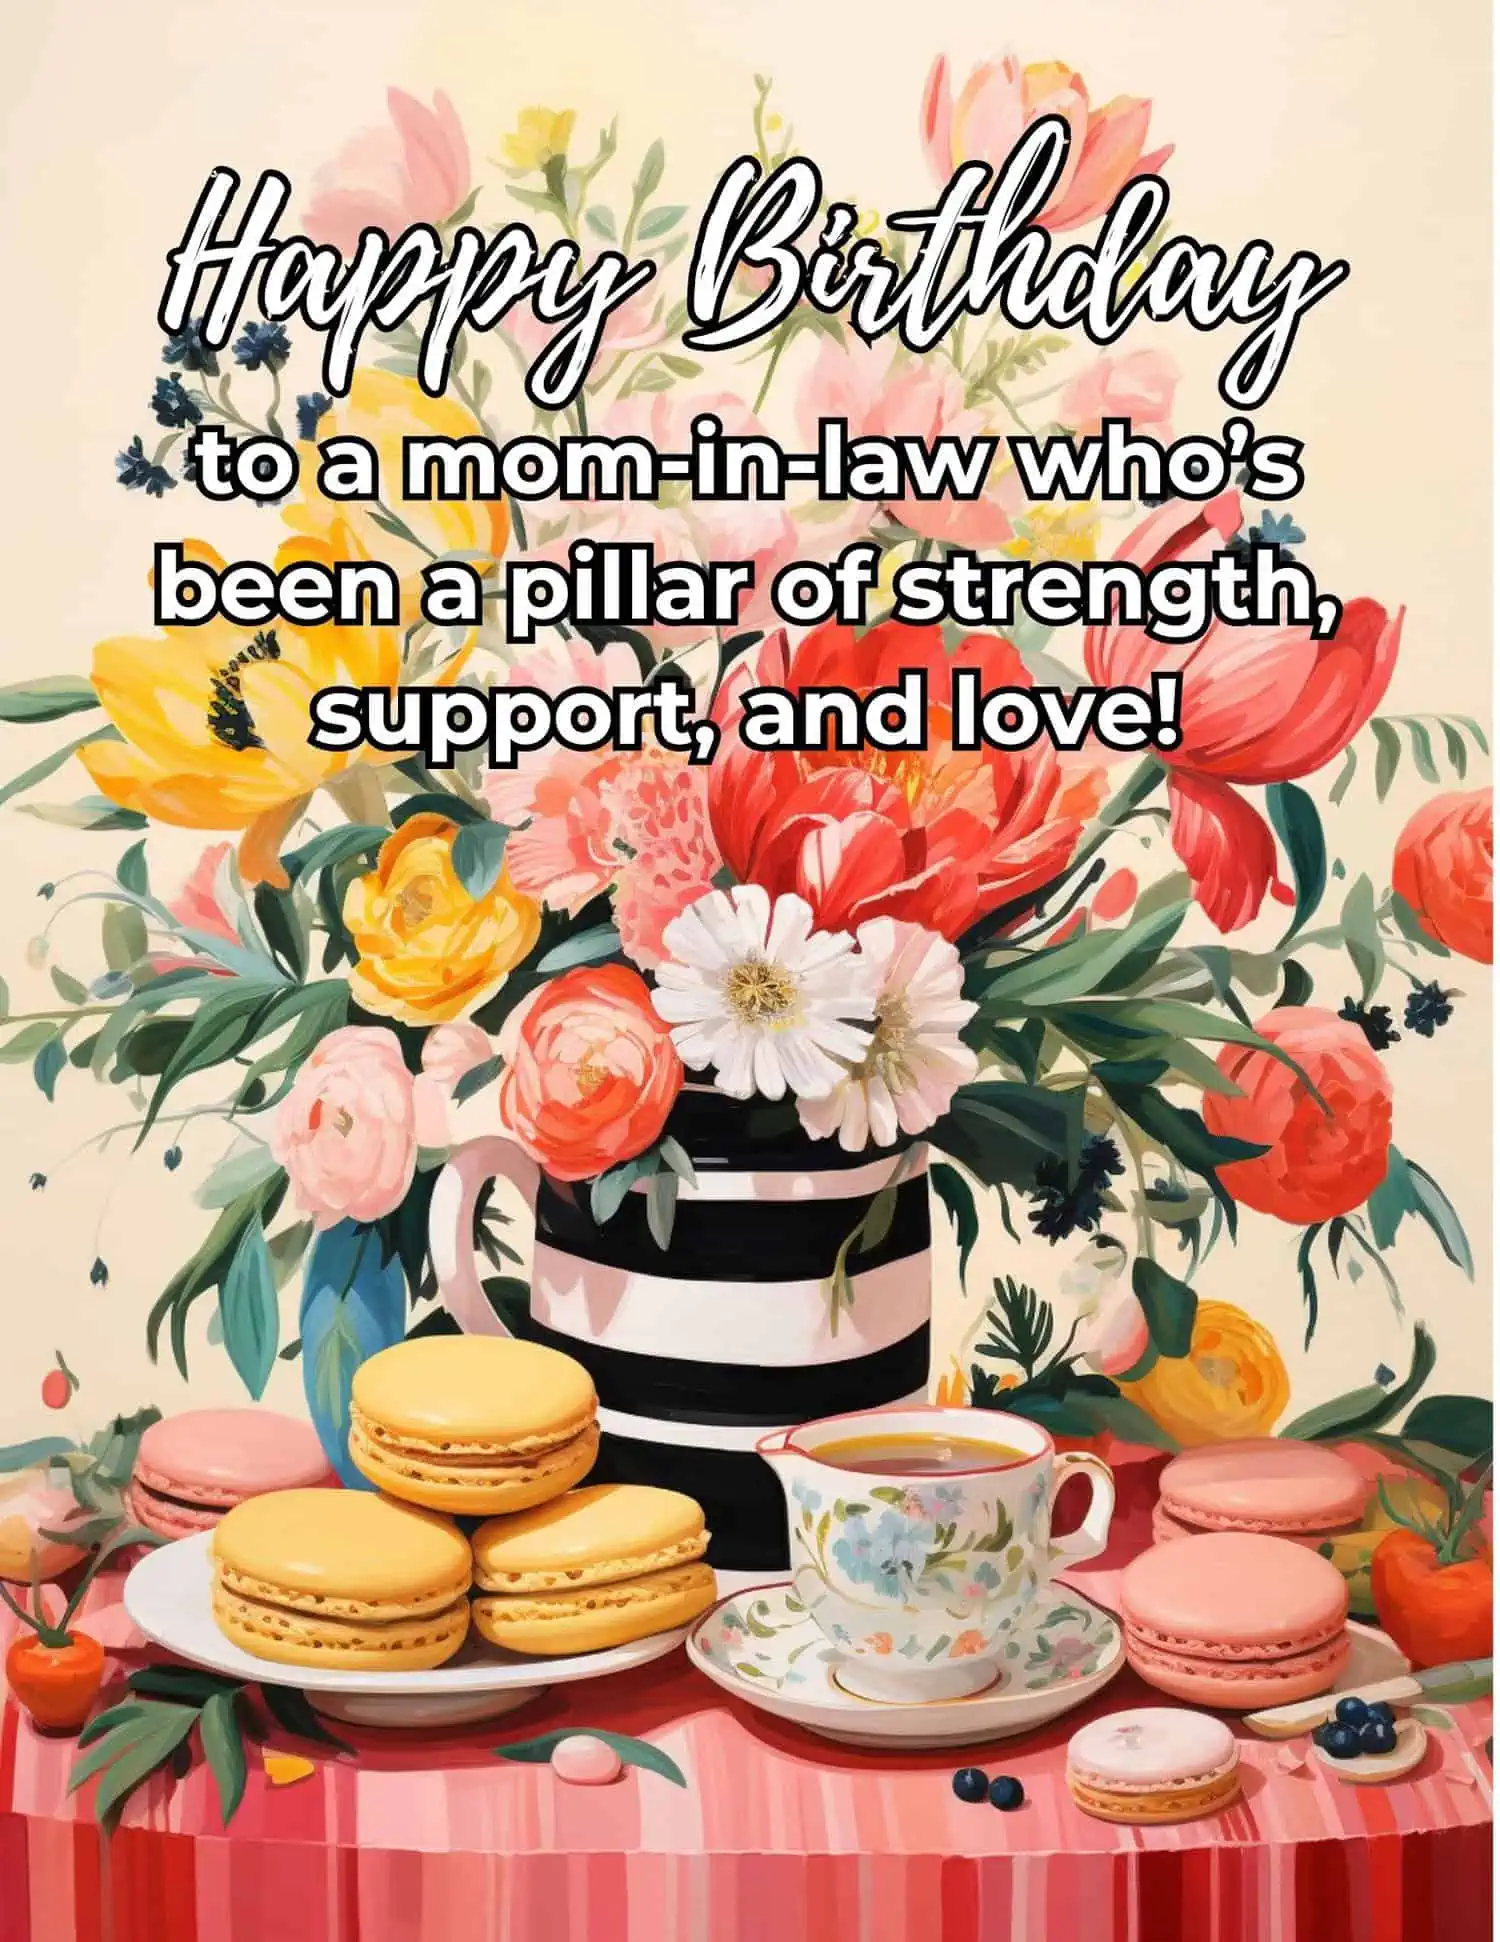 Heartfelt and memorable birthday greetings for a cherished mother-in-law.